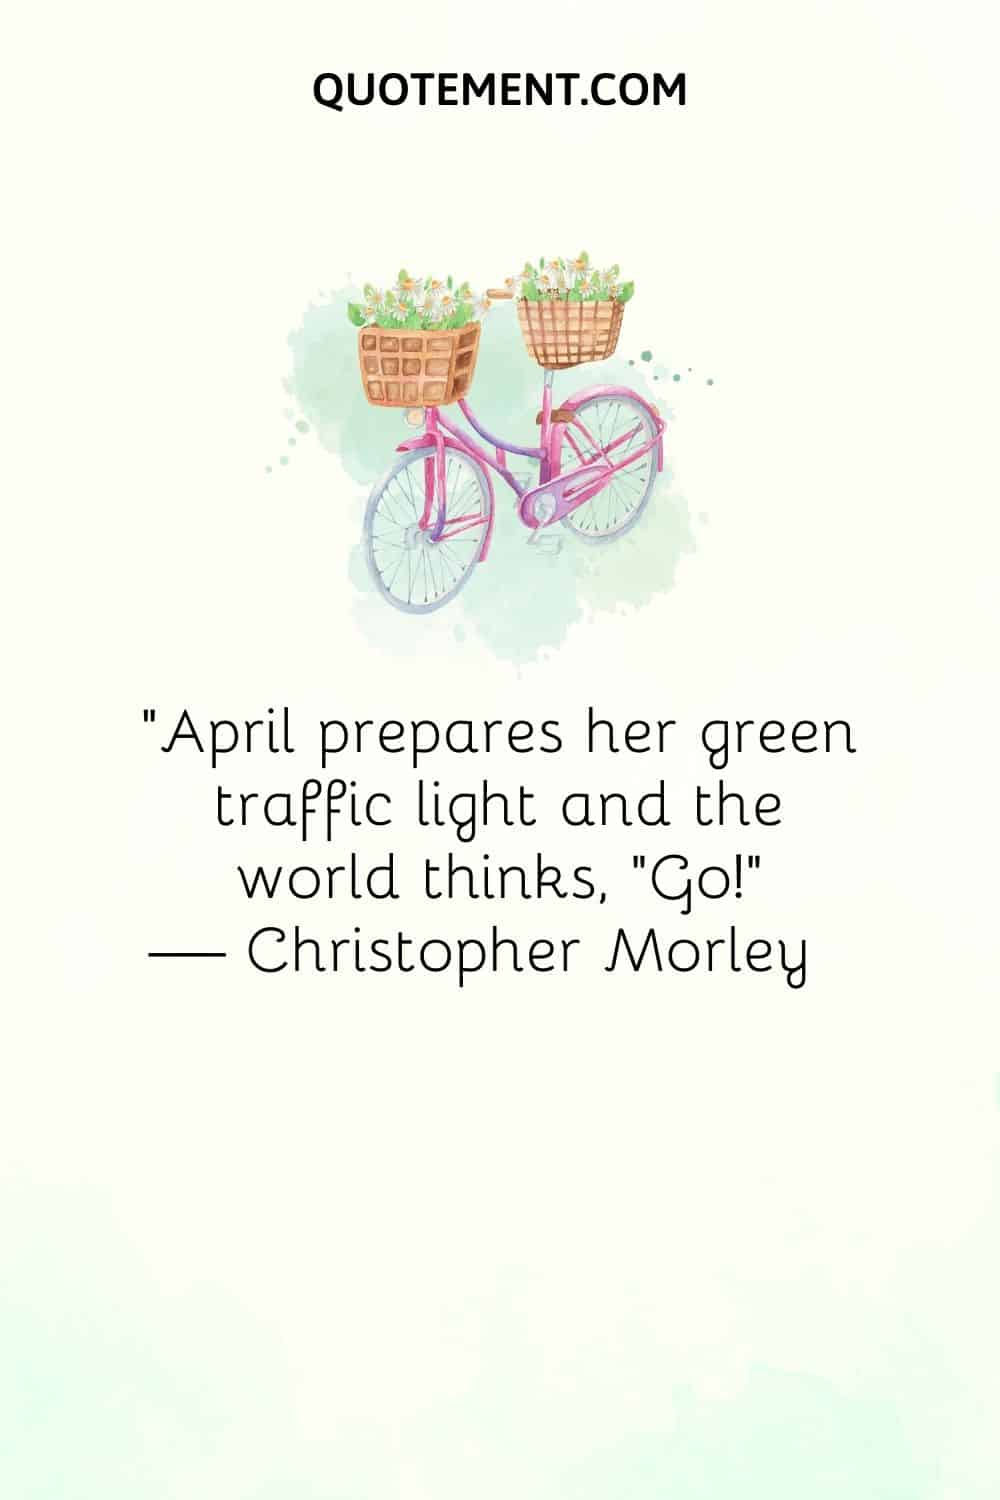 image of a pink bicycle representing welcome April quote